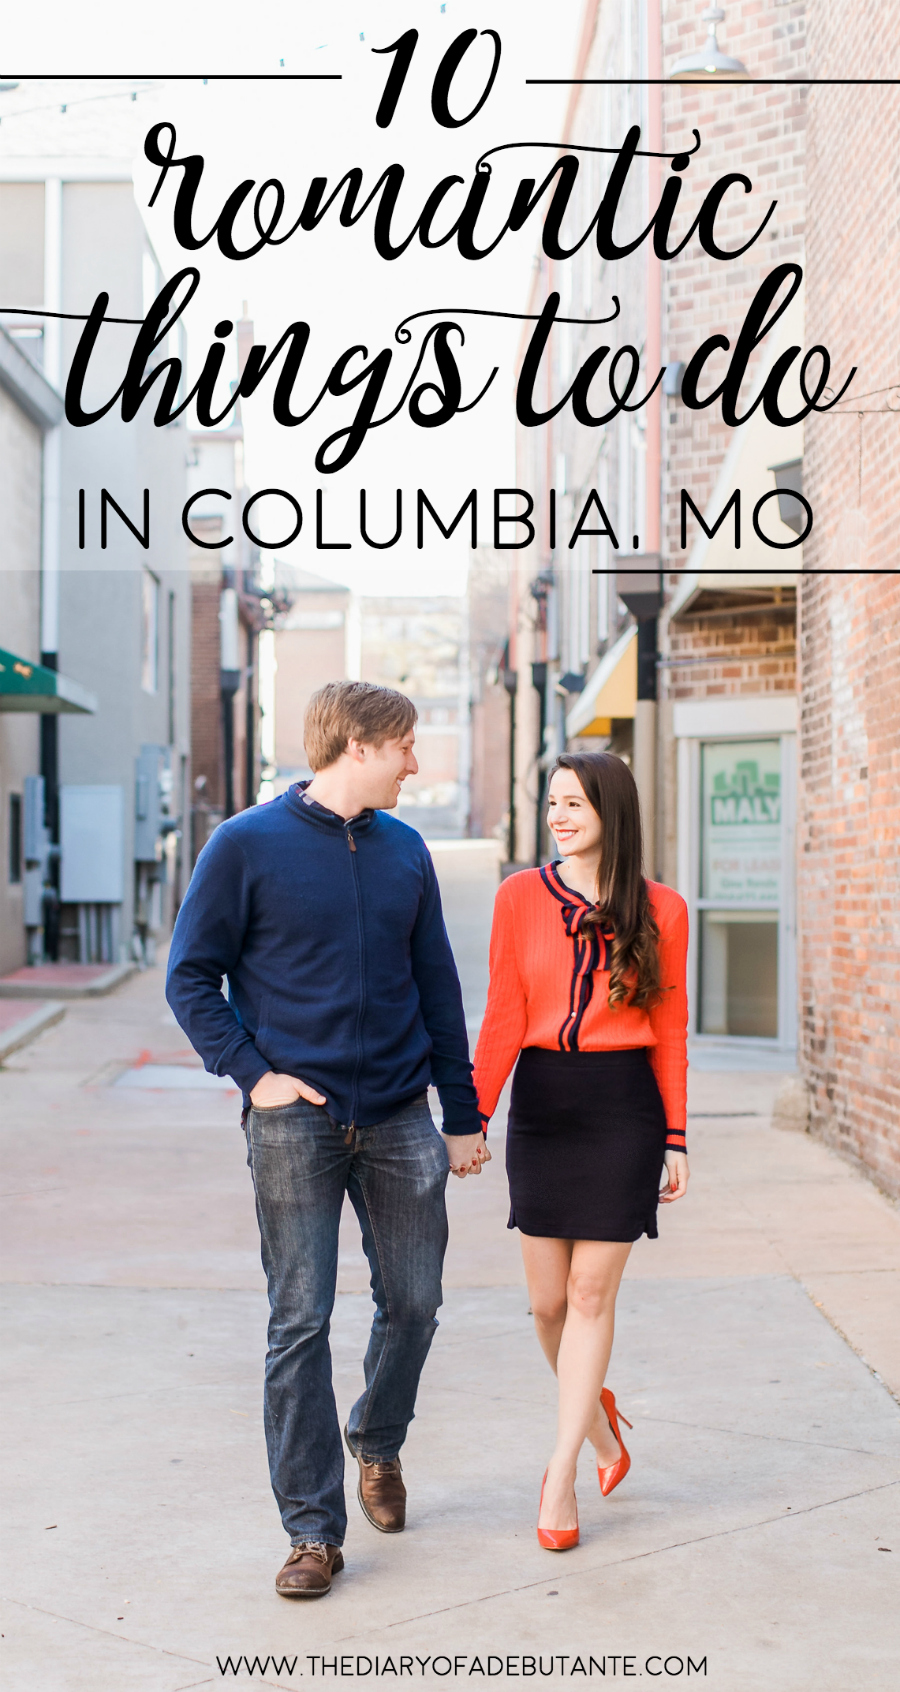 10 romantic things to do in Missouri by Florida turned Missouri blogger Stephanie Ziajka from Diary of a Debutante